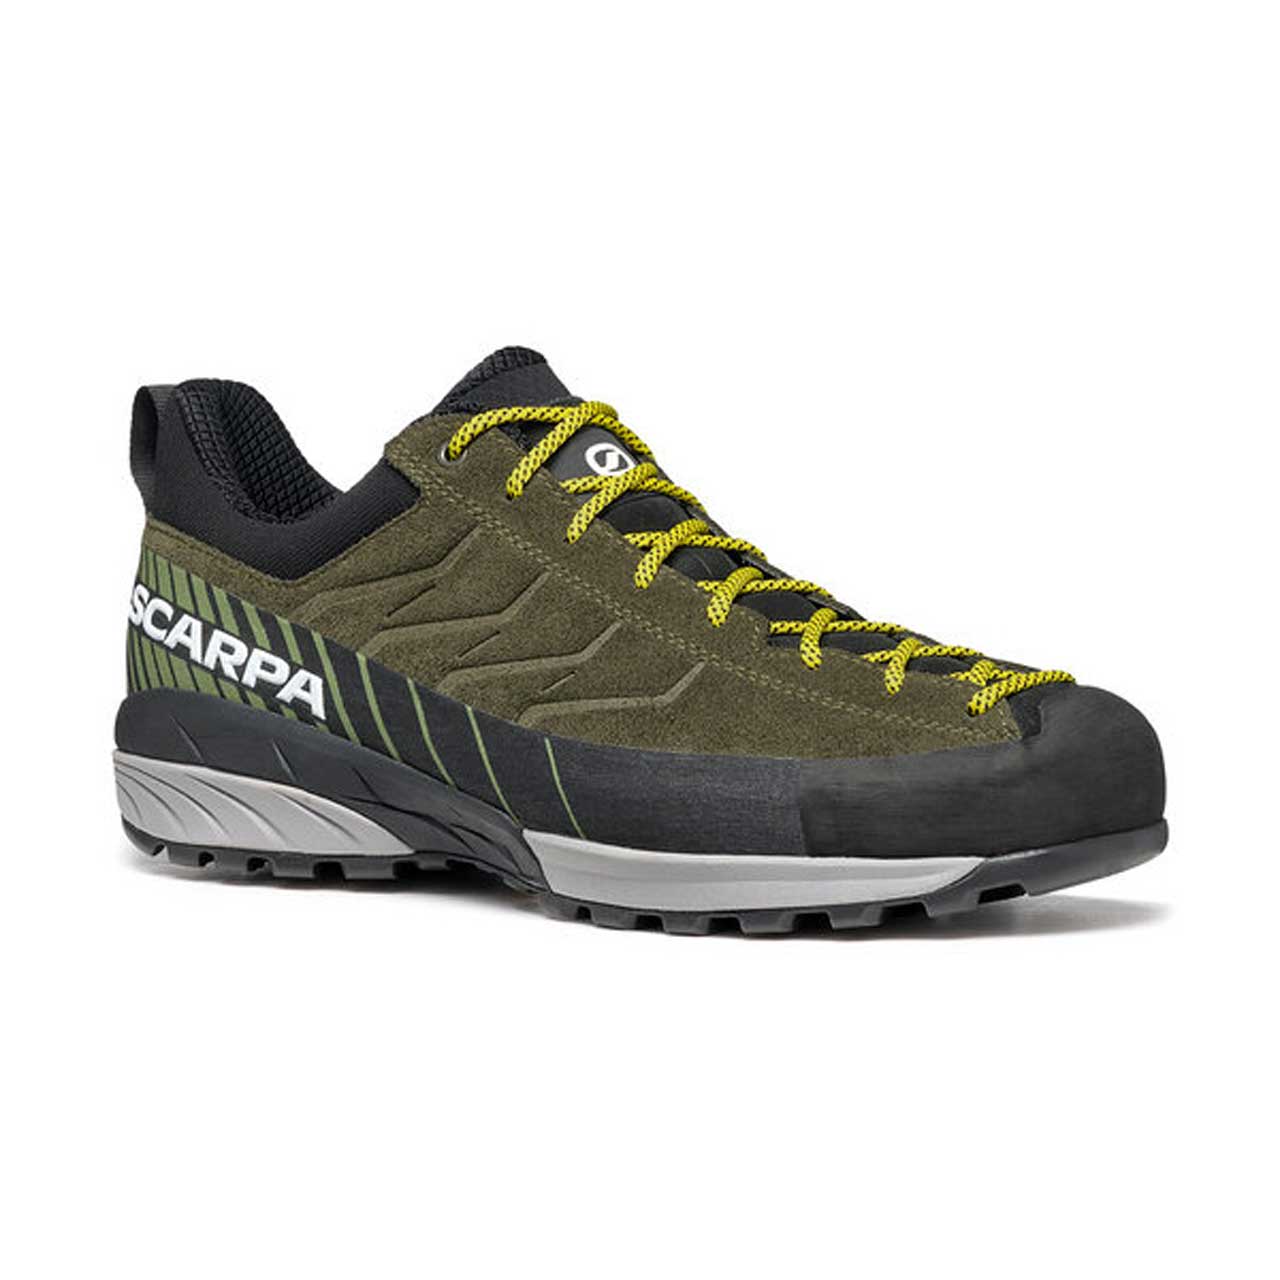 Scarpa Mescalito - Thyme Green/Forest, 44